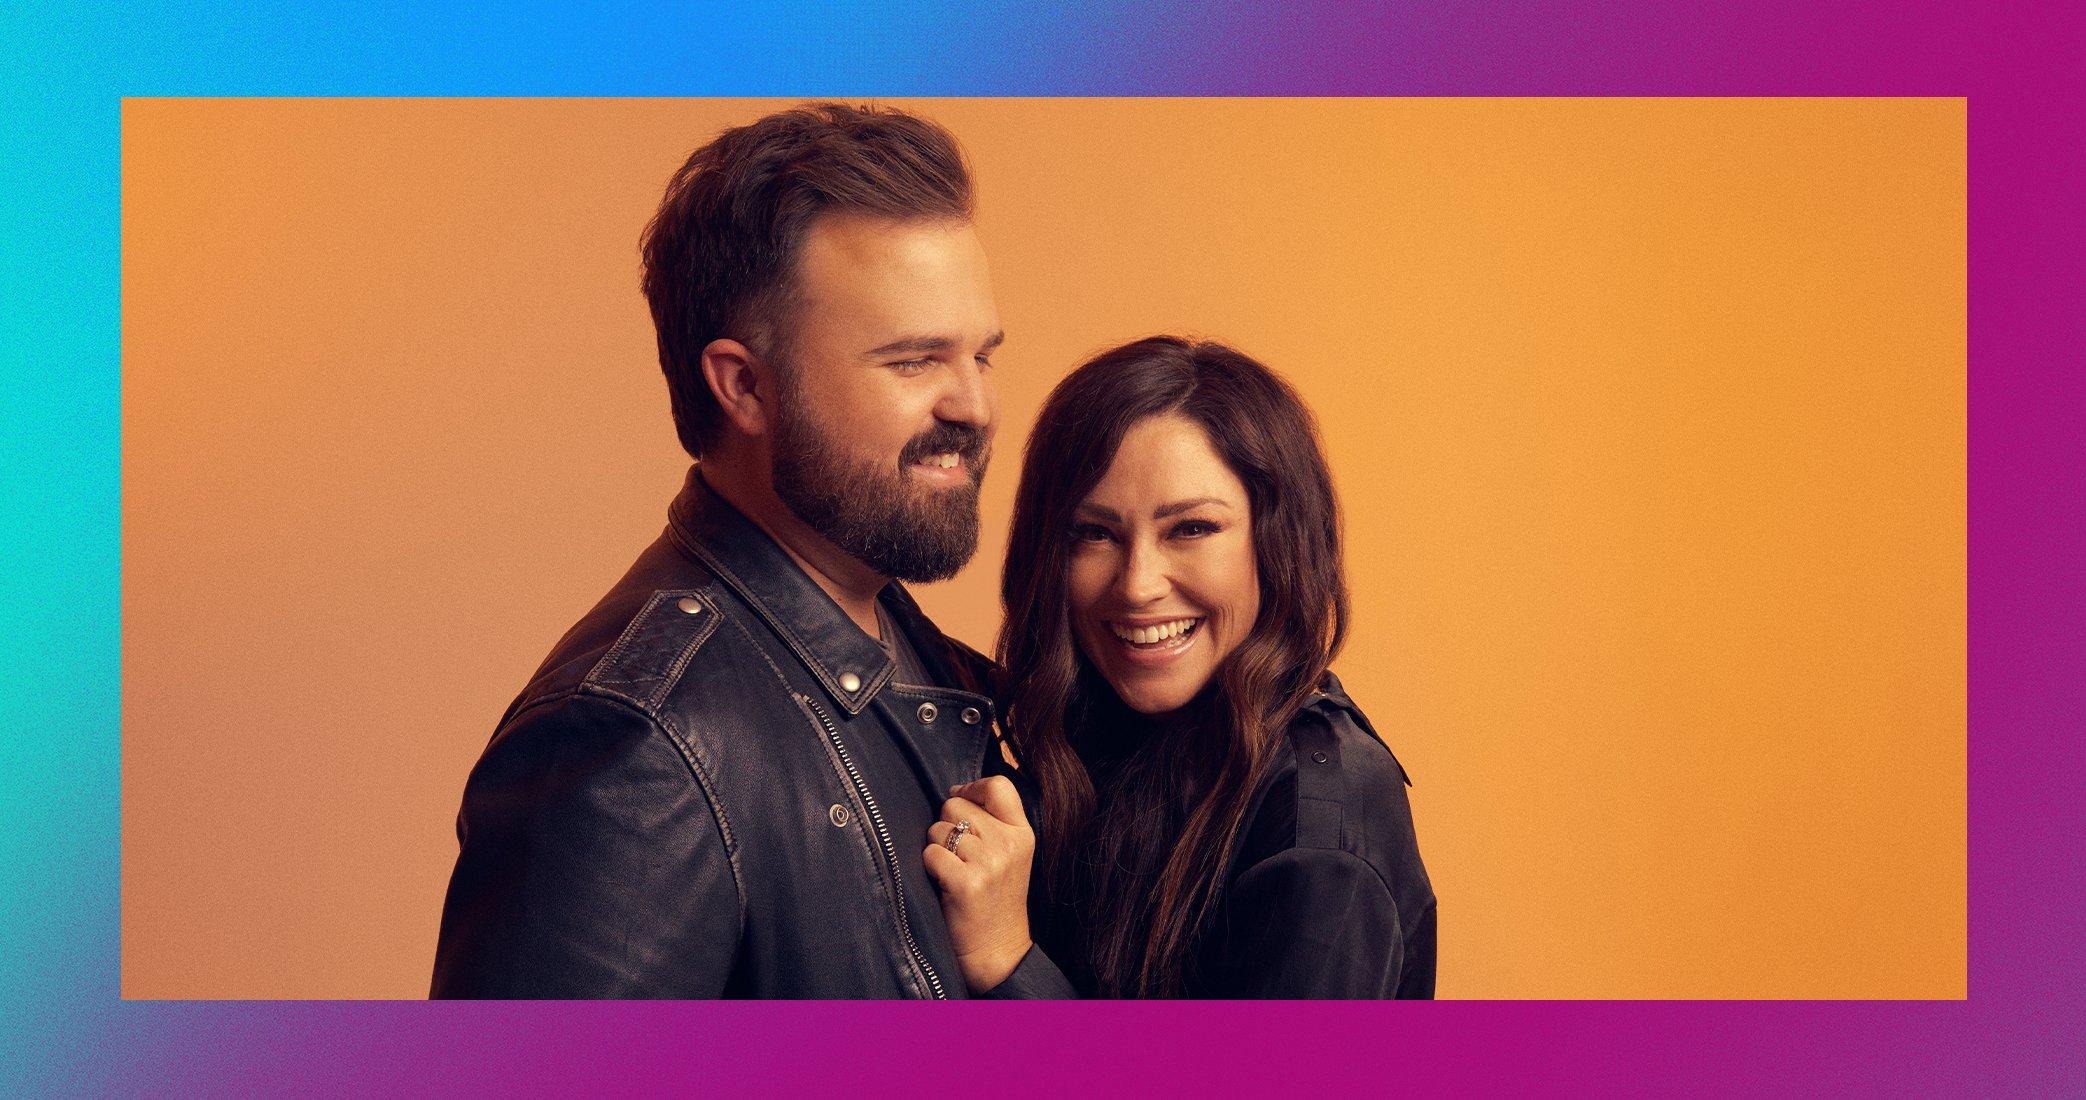 Kari Jobe and Cody Carnes smiling in front of colorful backdrop